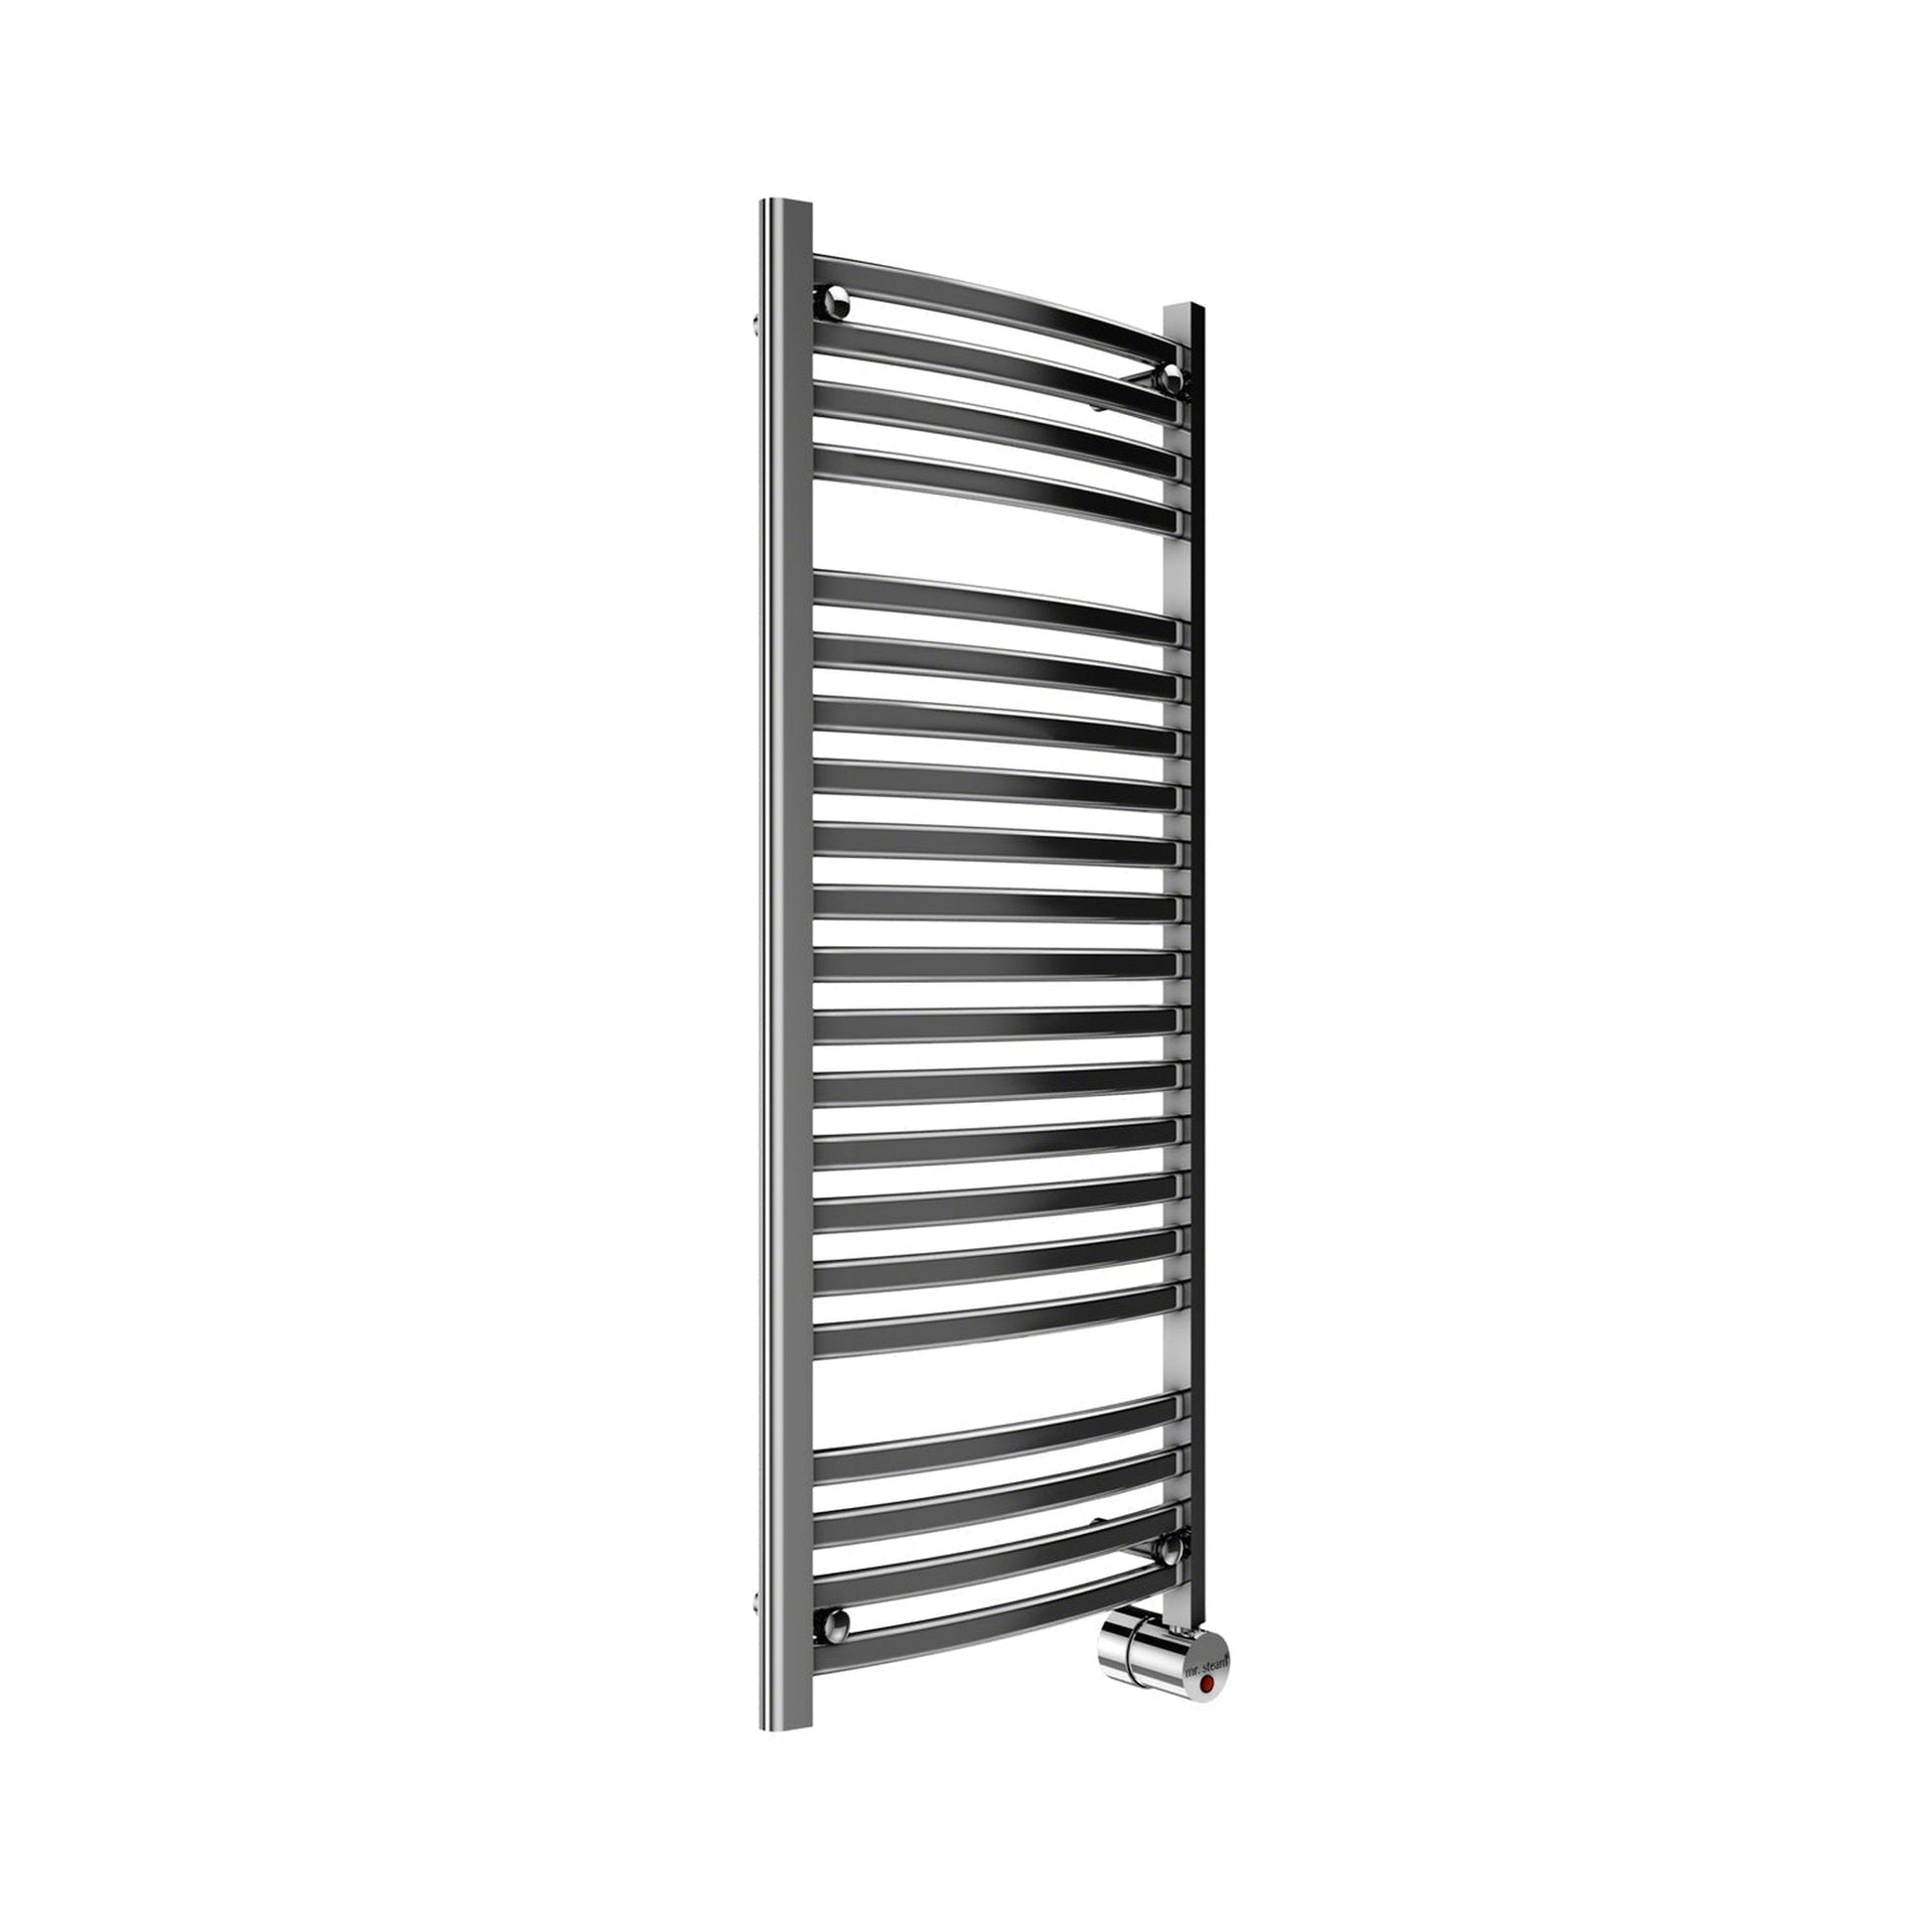 https://usbathstore.com/cdn/shop/products/MrSteam-Broadway-Collection-20-x-48-21-Bar-Polished-Chrome-Hardwired-Wall-Mounted-Electric-Towel-Warmer-With-Digital-Timer-and-Built-in-Aromatherapy-Oil-Well.jpg?v=1658507790&width=1946